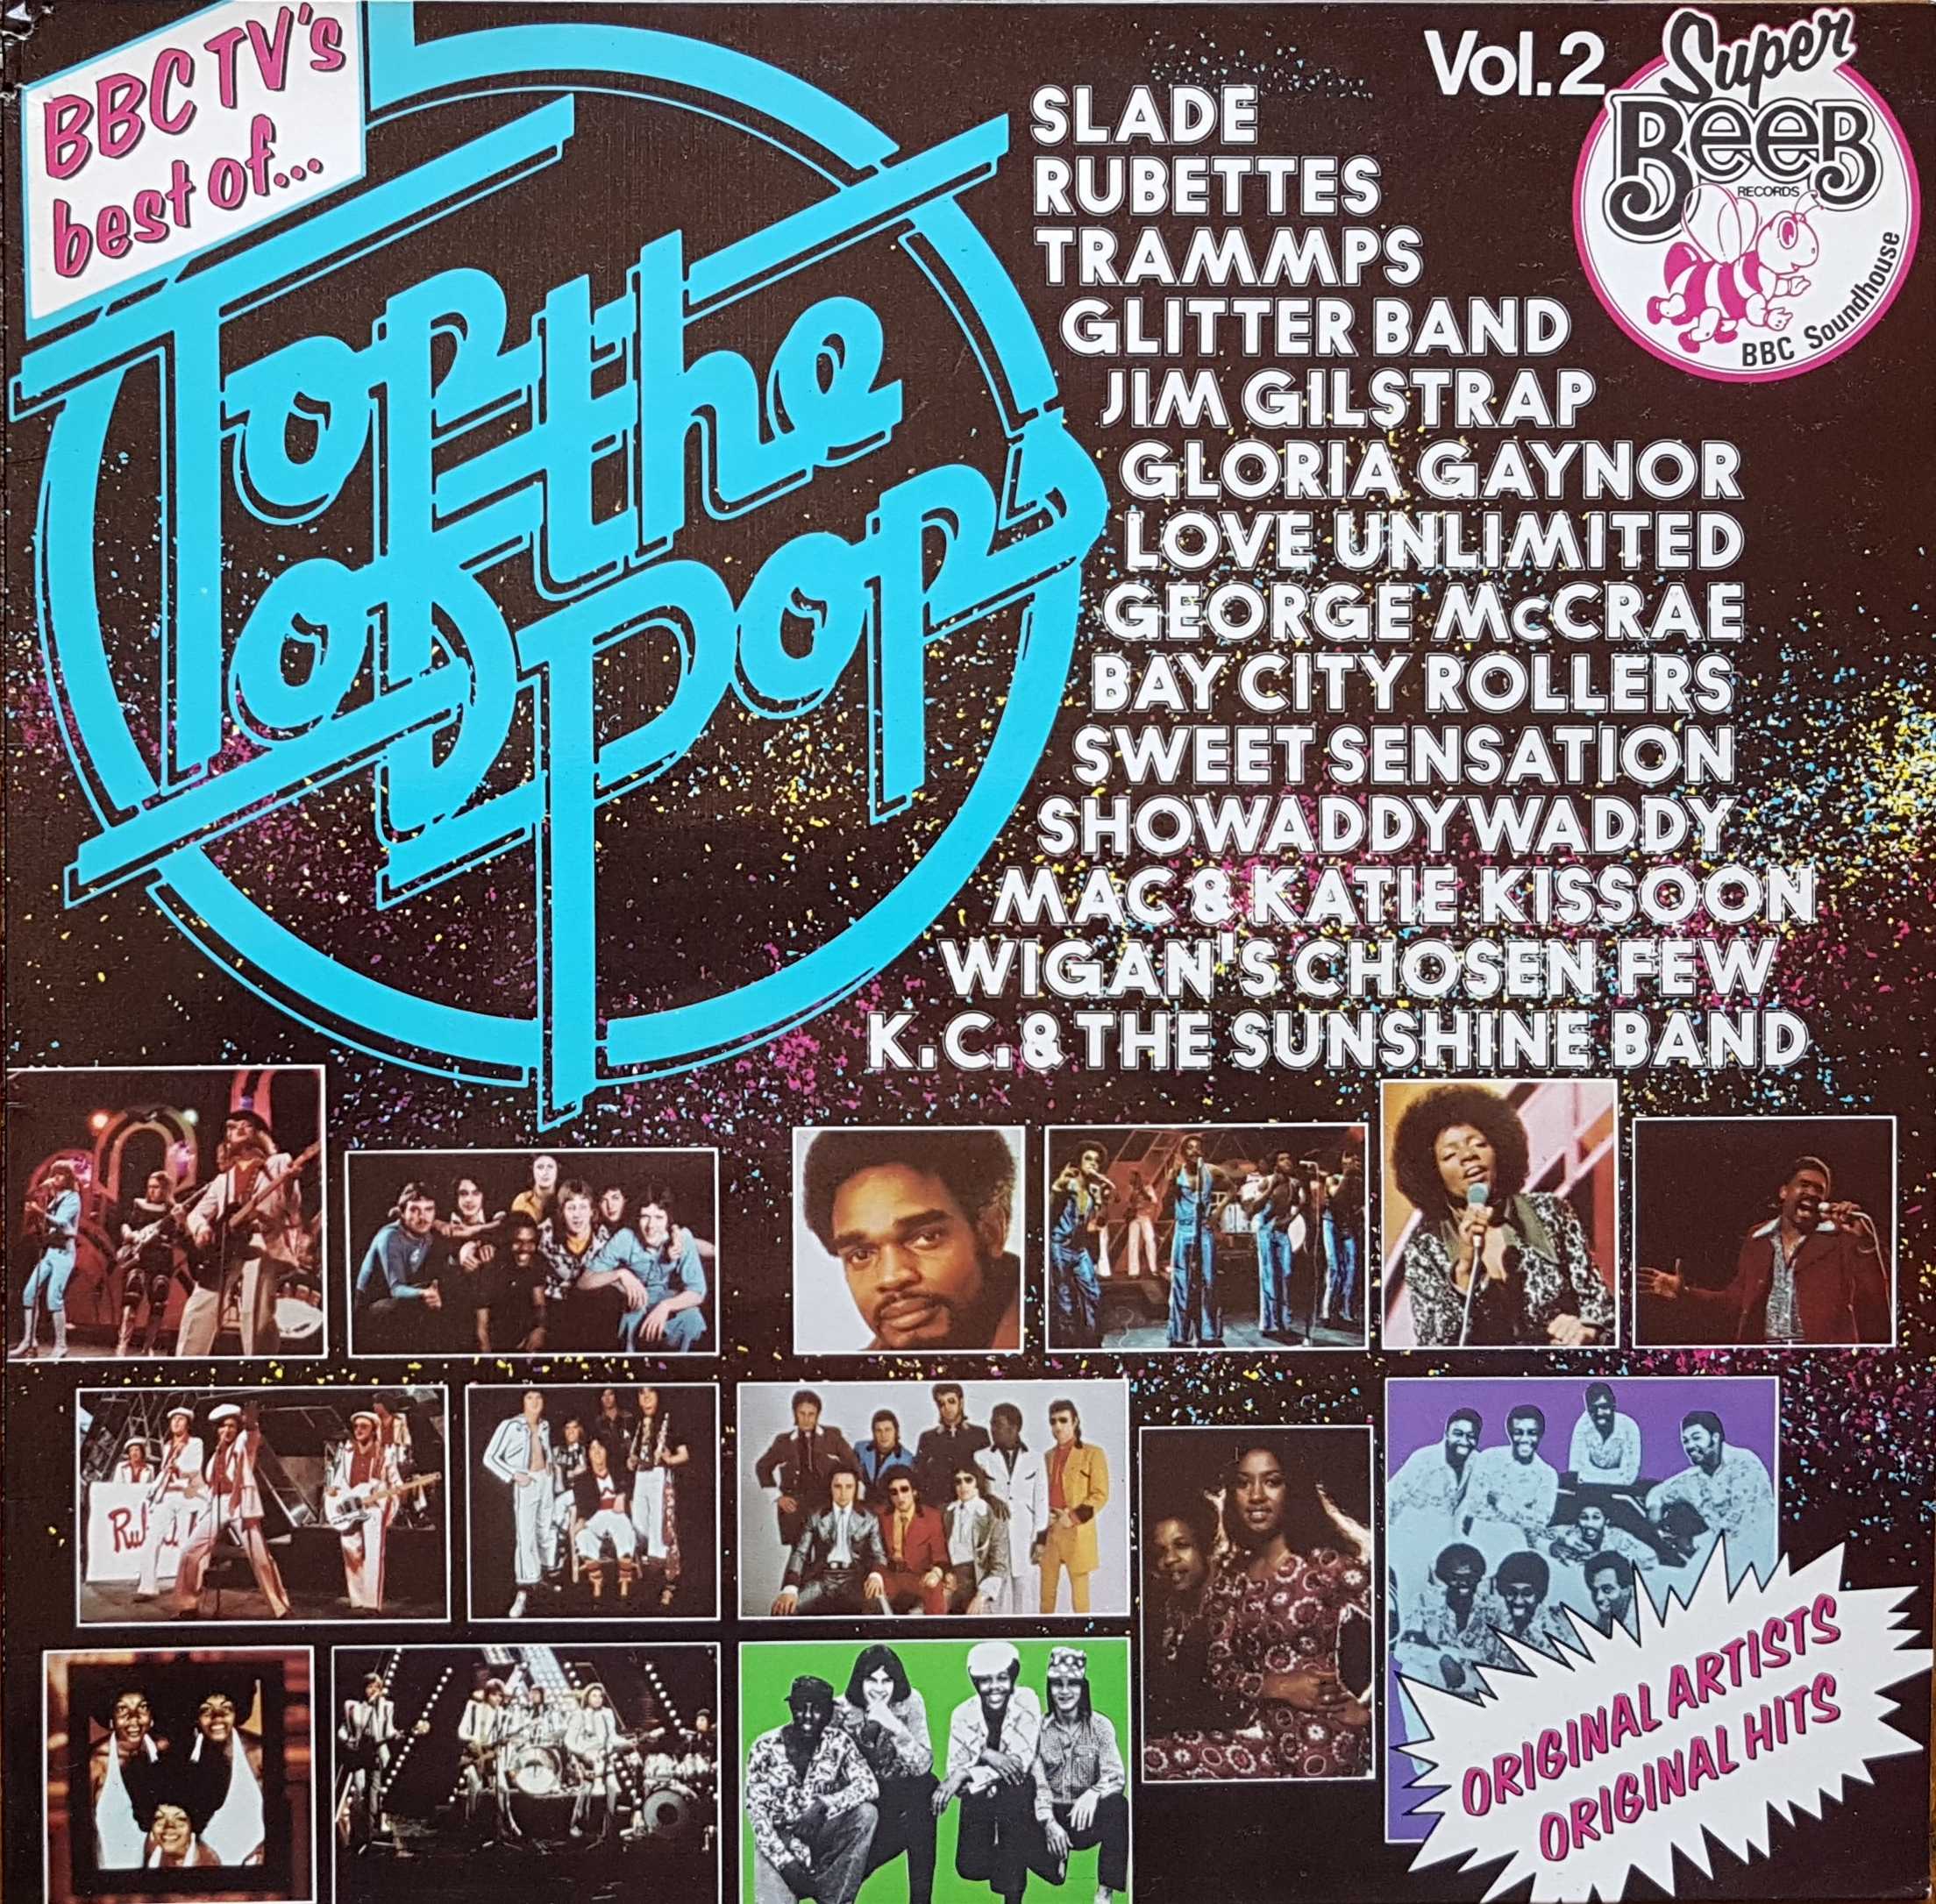 Picture of BELP 003 Top of the pops - Volume 2 by artist Various from the BBC albums - Records and Tapes library